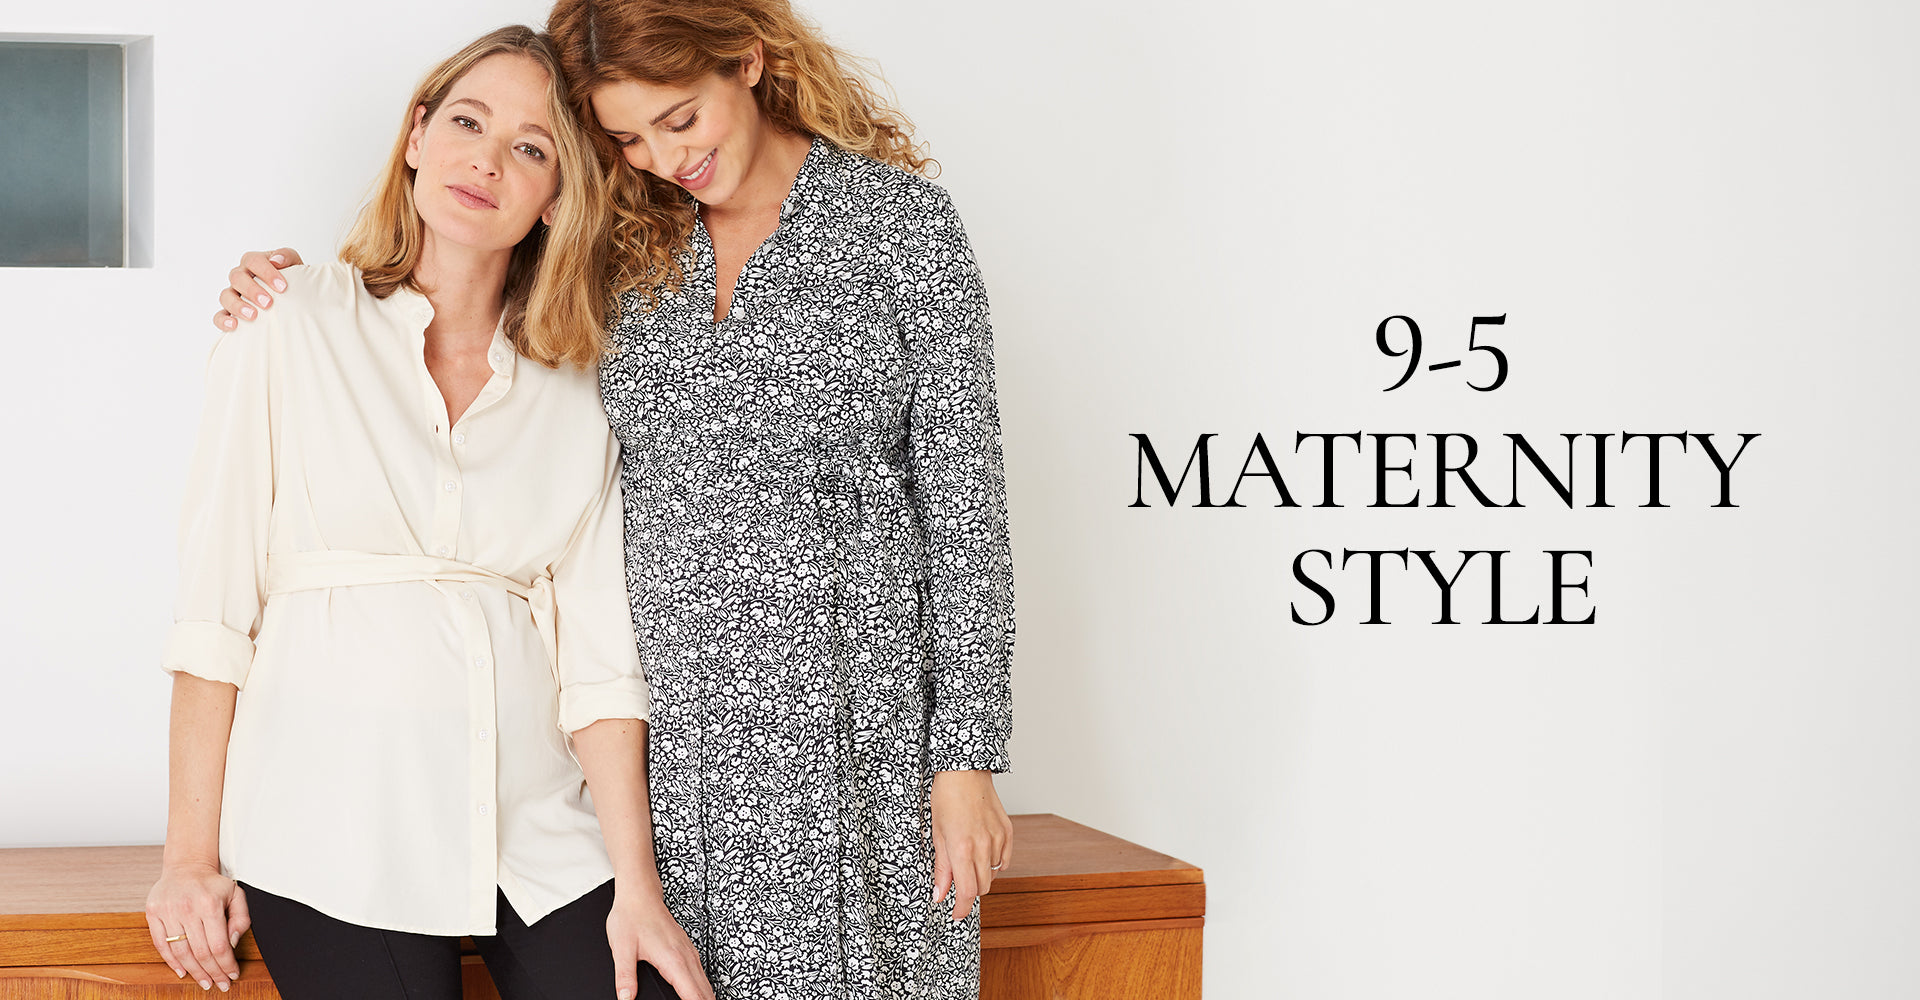 The 9-5 Maternity Style